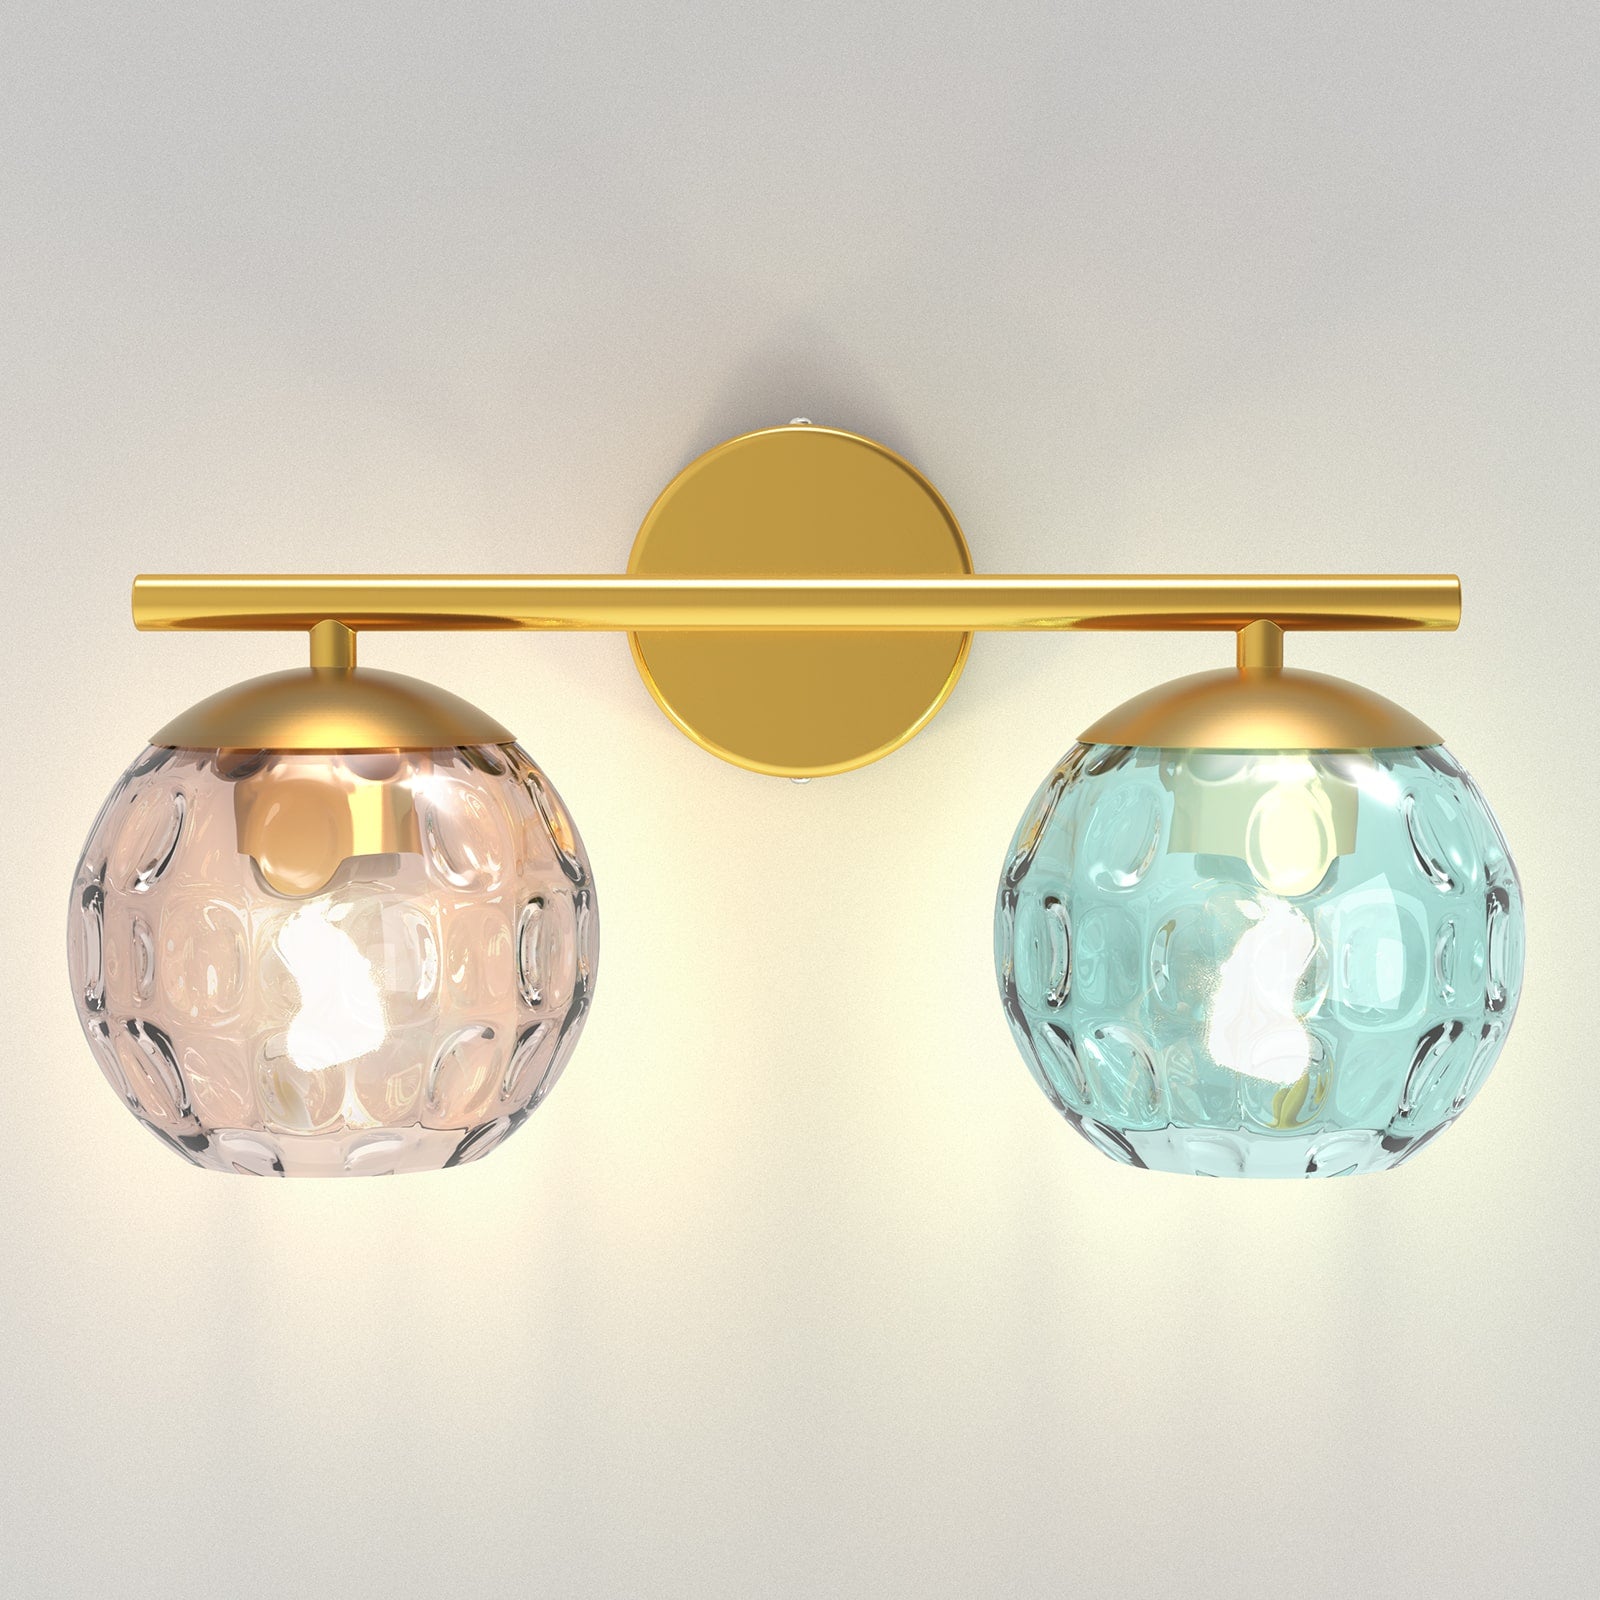 C04 Bathroom Vanity Light with Colorful Glass Shade, Modern Wall Sconce Lighting for Bath, Living Room.